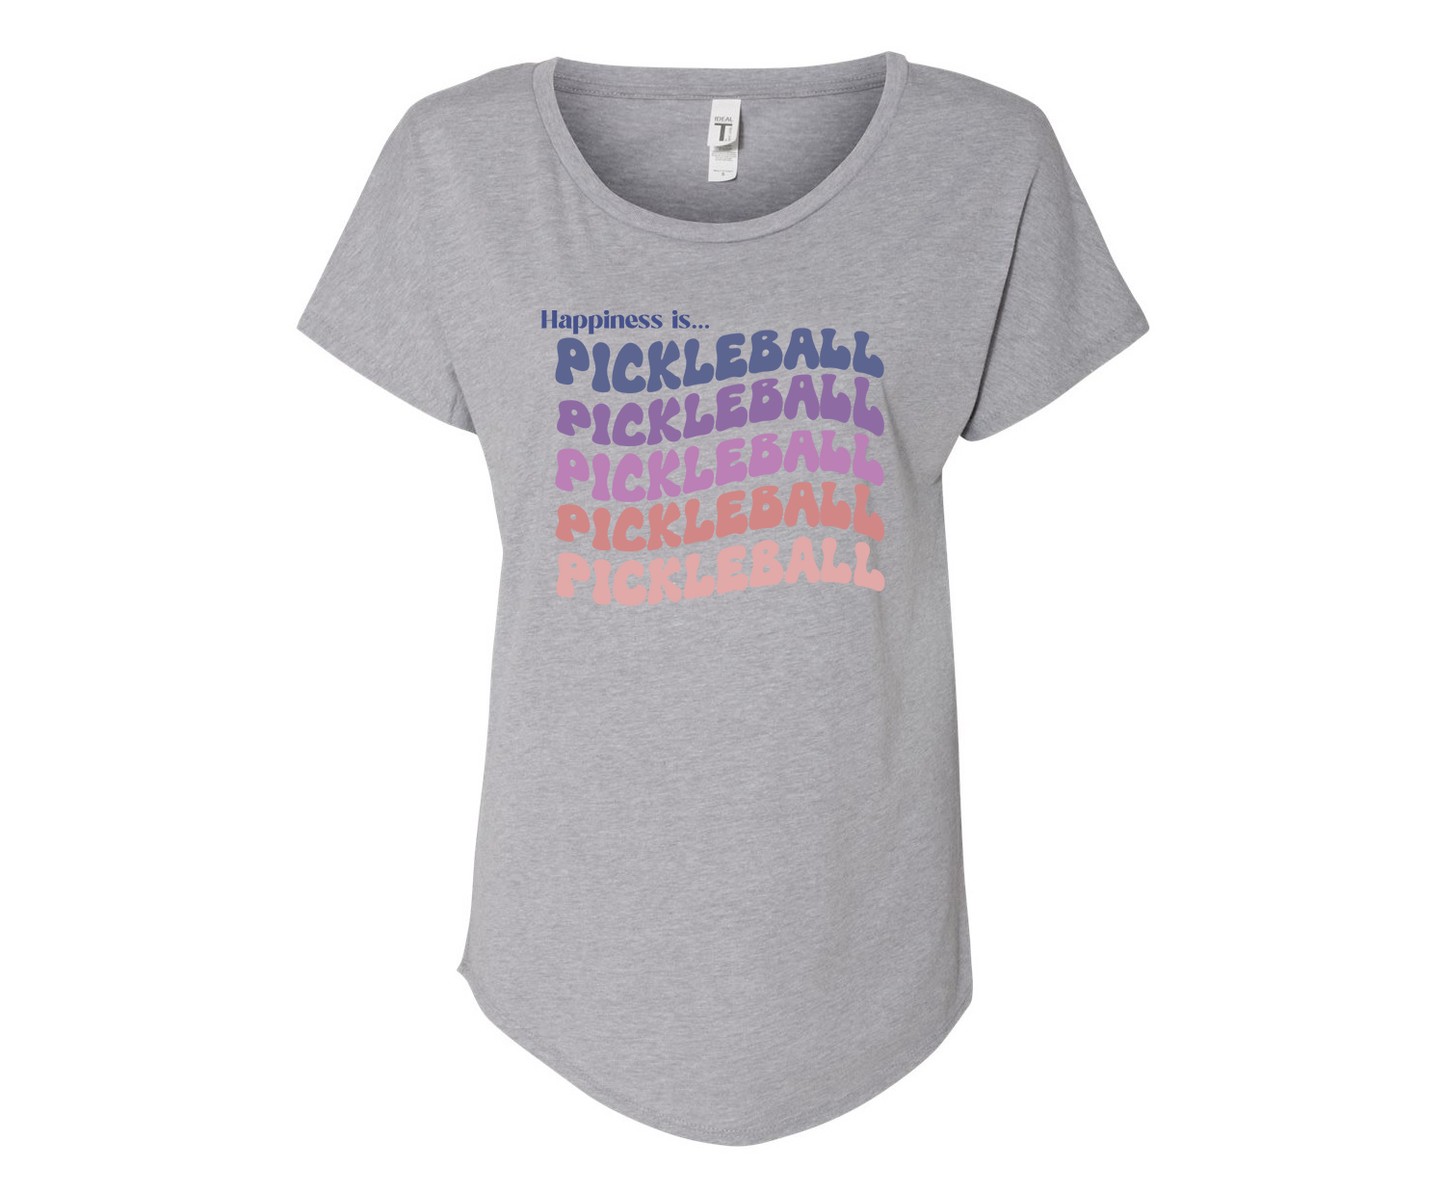 Happiness is Pickleball Ladies Tee Shirt - In White & Grey